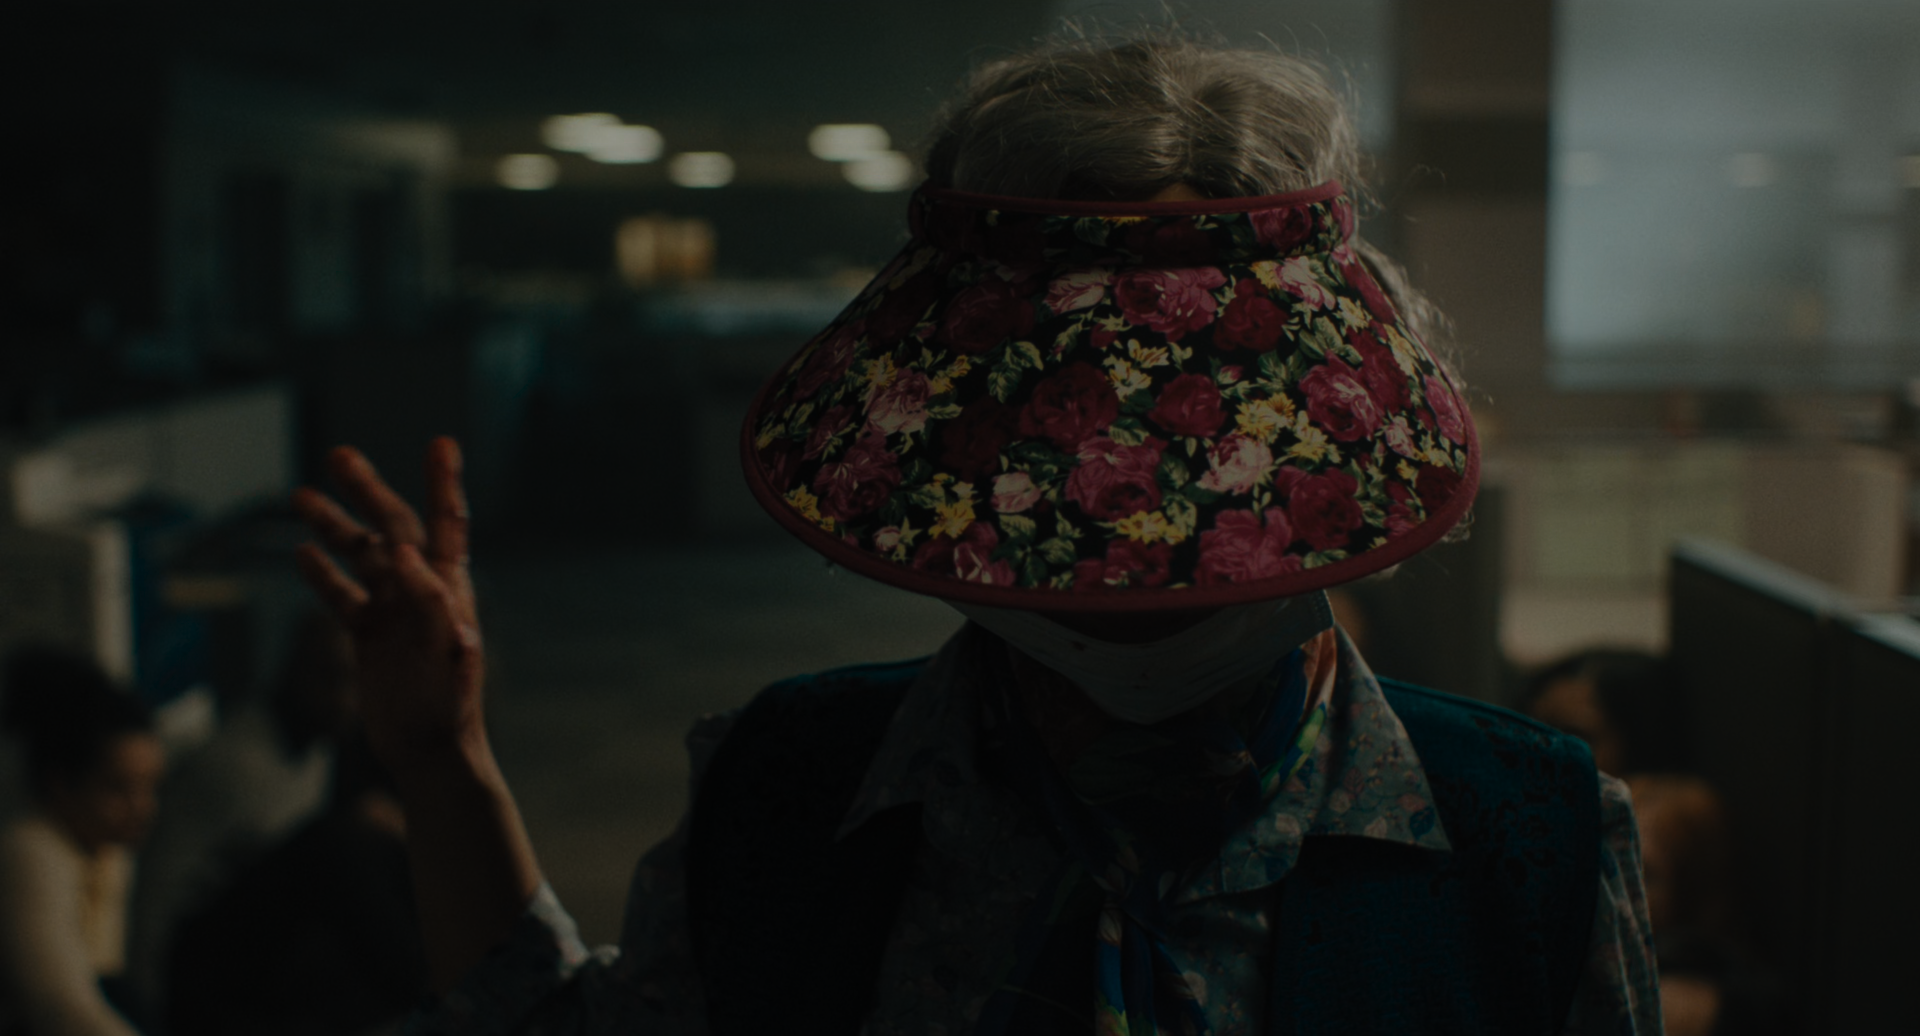 EEAAO Screenshot- Jobu's second look is the aunty-fied version of her first. Wearing a floral visor, surgical mask, and campy floral 70s scarf and lapelled shirt with a blue quilted vest.